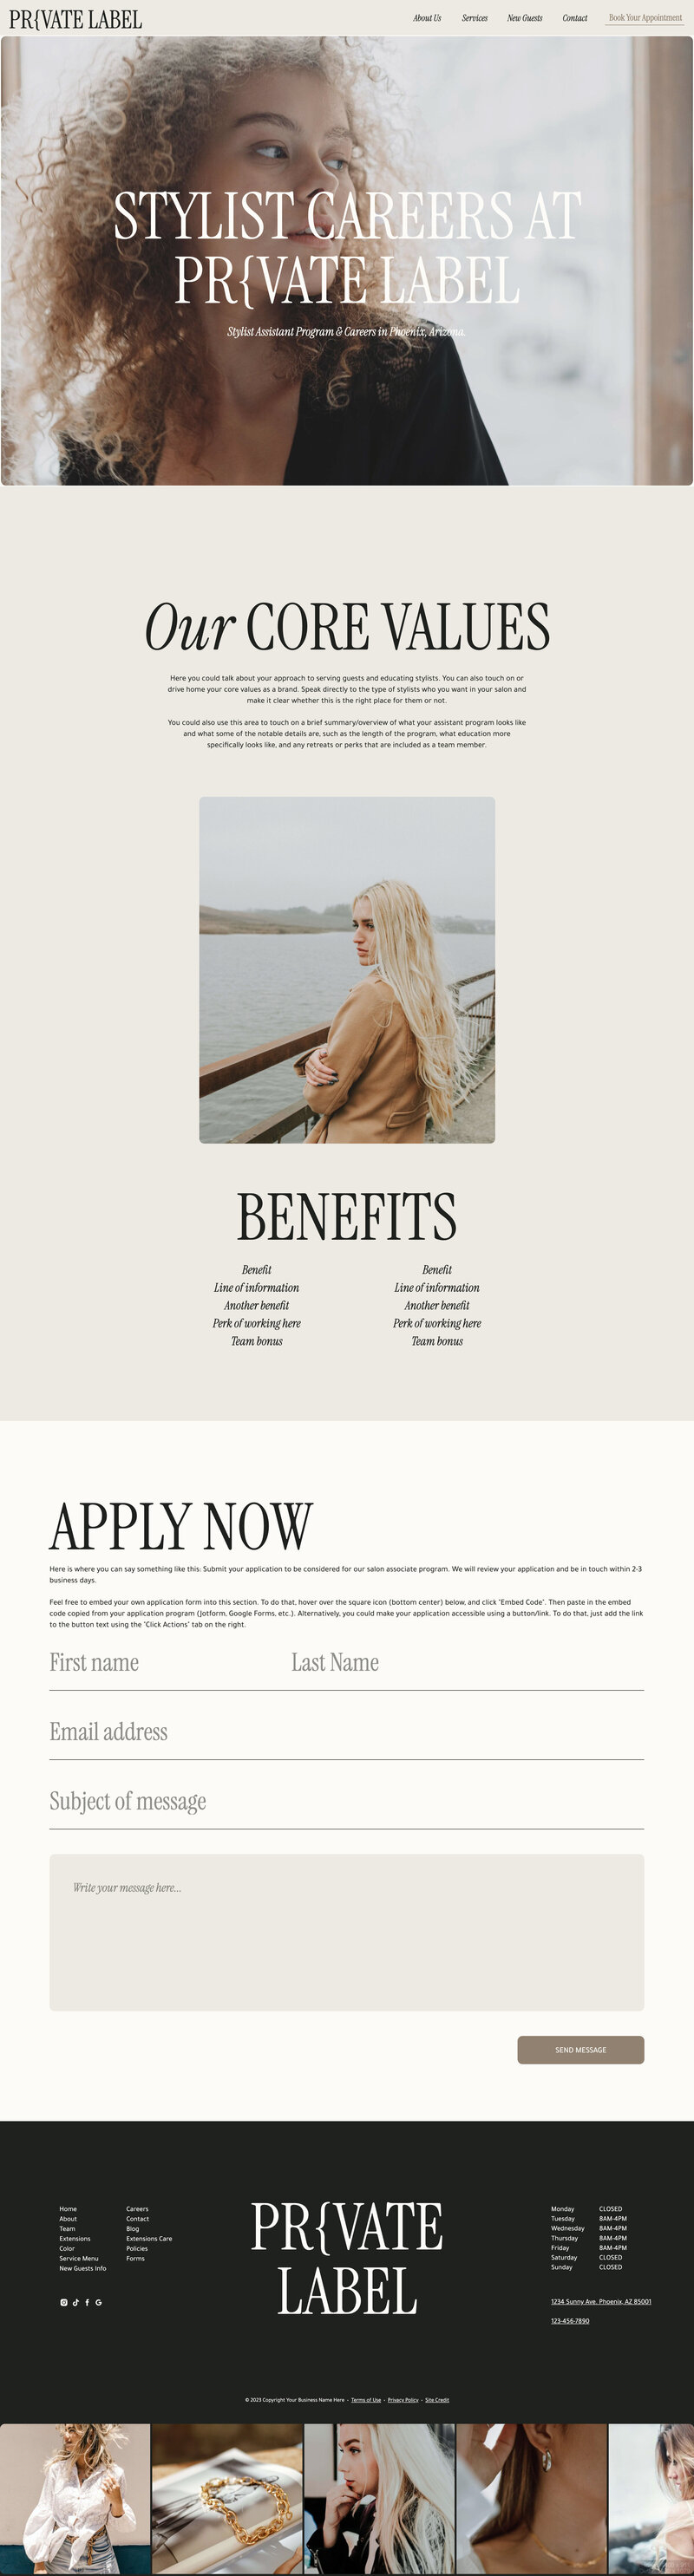 website-template-for-hair-stylists-salons-beauty-industry-private-label-franklin-and-willow-careers-2023-06-25-15_41_58